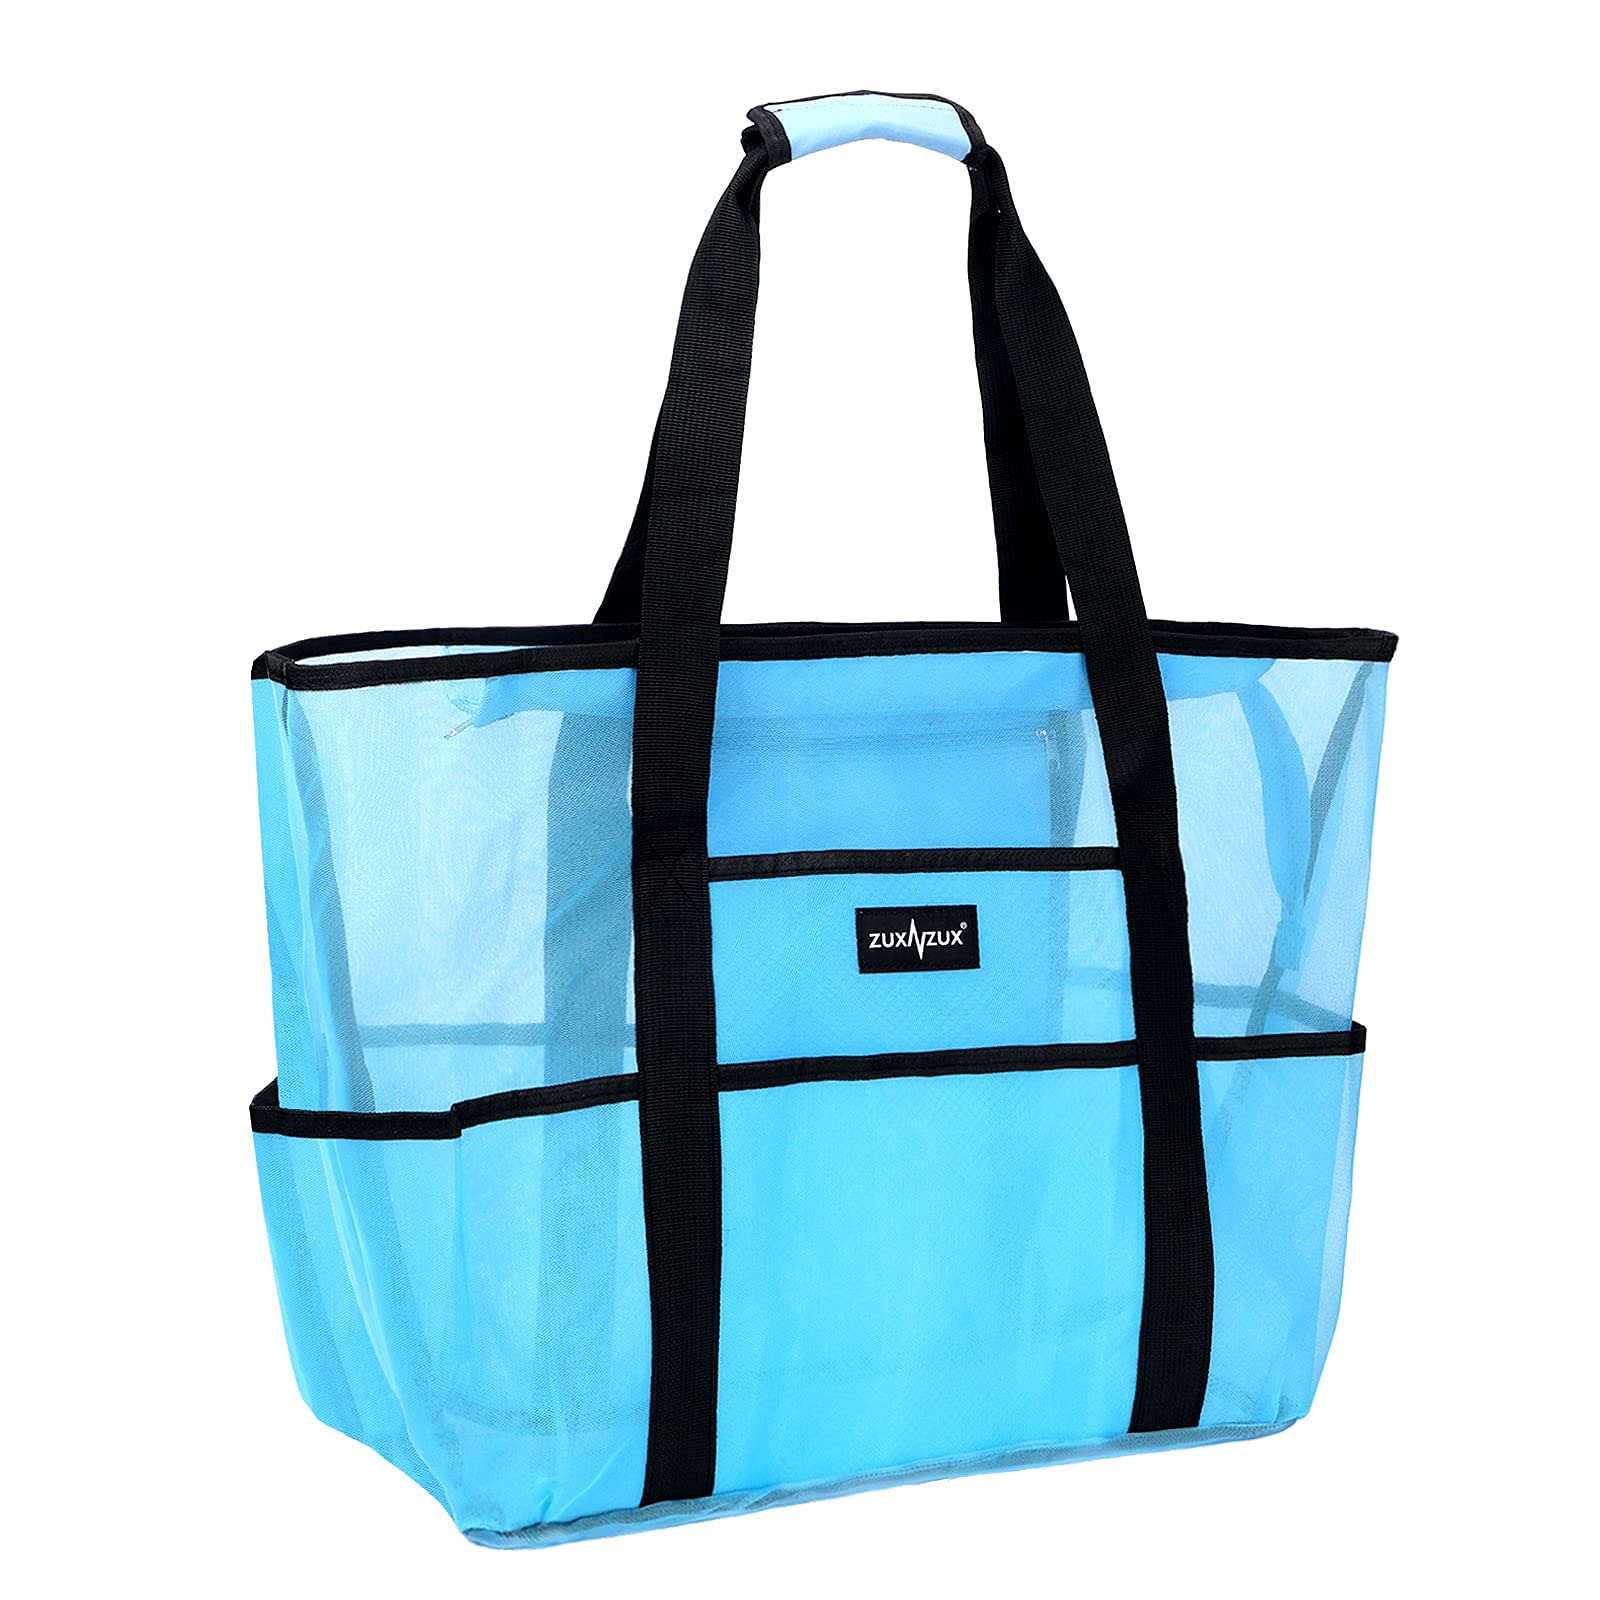 TureClos Extra Large Mesh Beach Bags and Totes, Large Capacity Storage ...